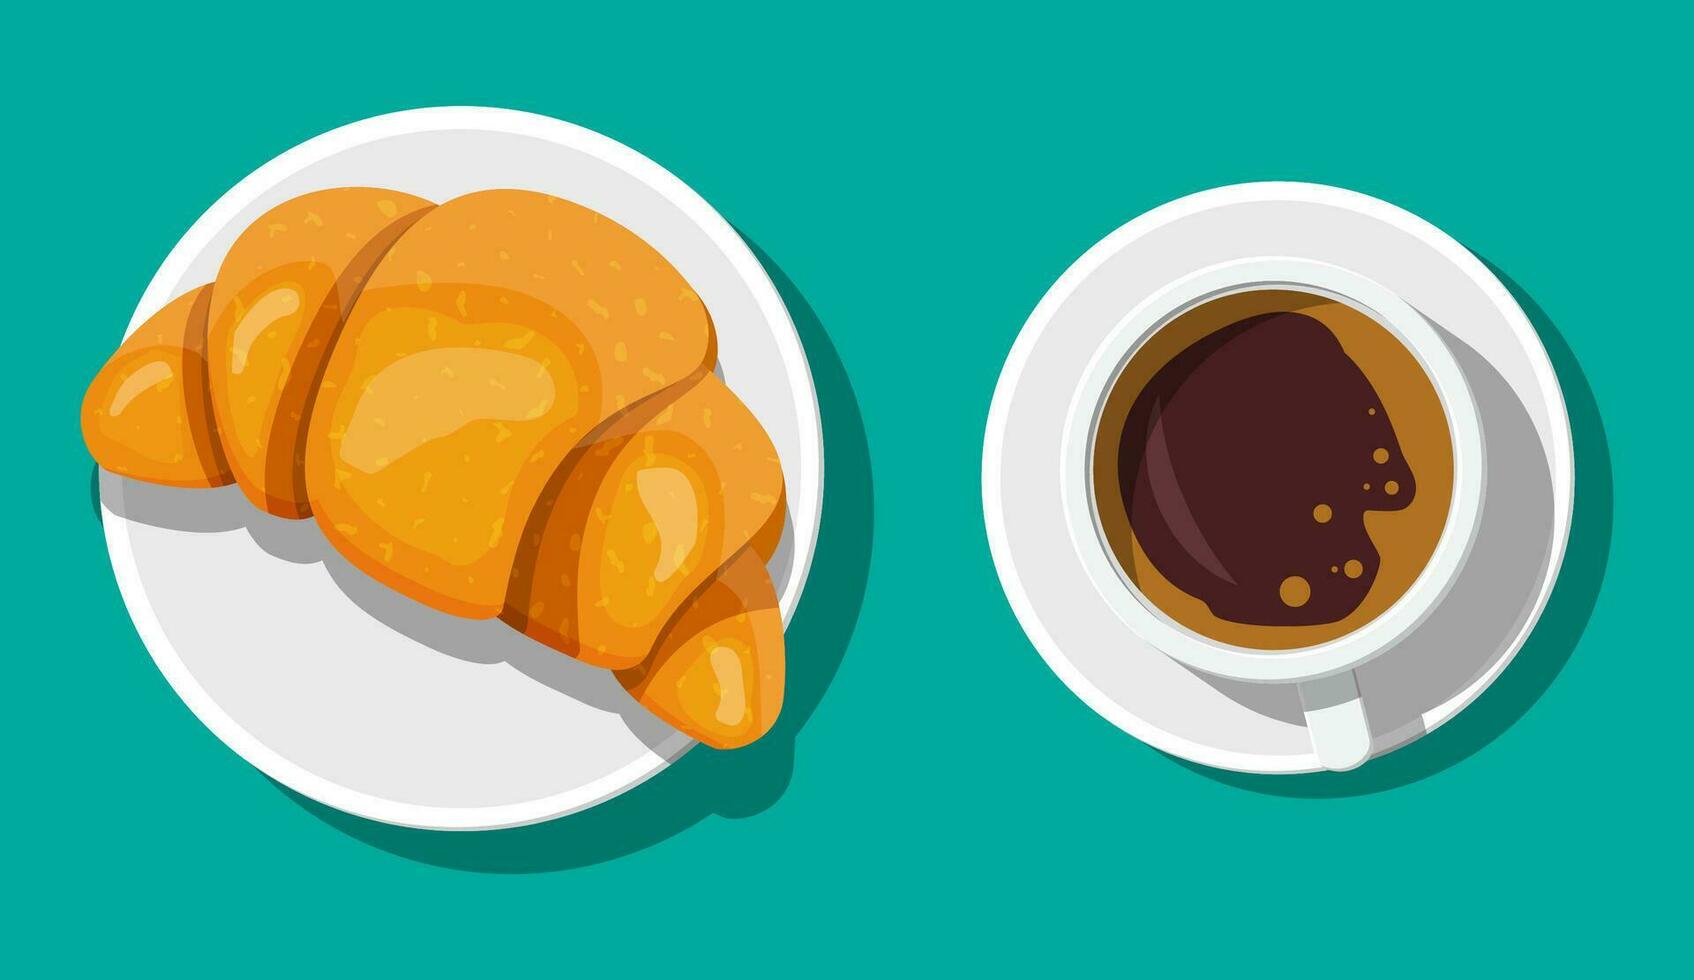 Coffee cup and french croissant. Coffee hot drink. Concept for cafe, restaurant, menu, desserts, bakery. Breakfast top view. Vector illustration in flat style